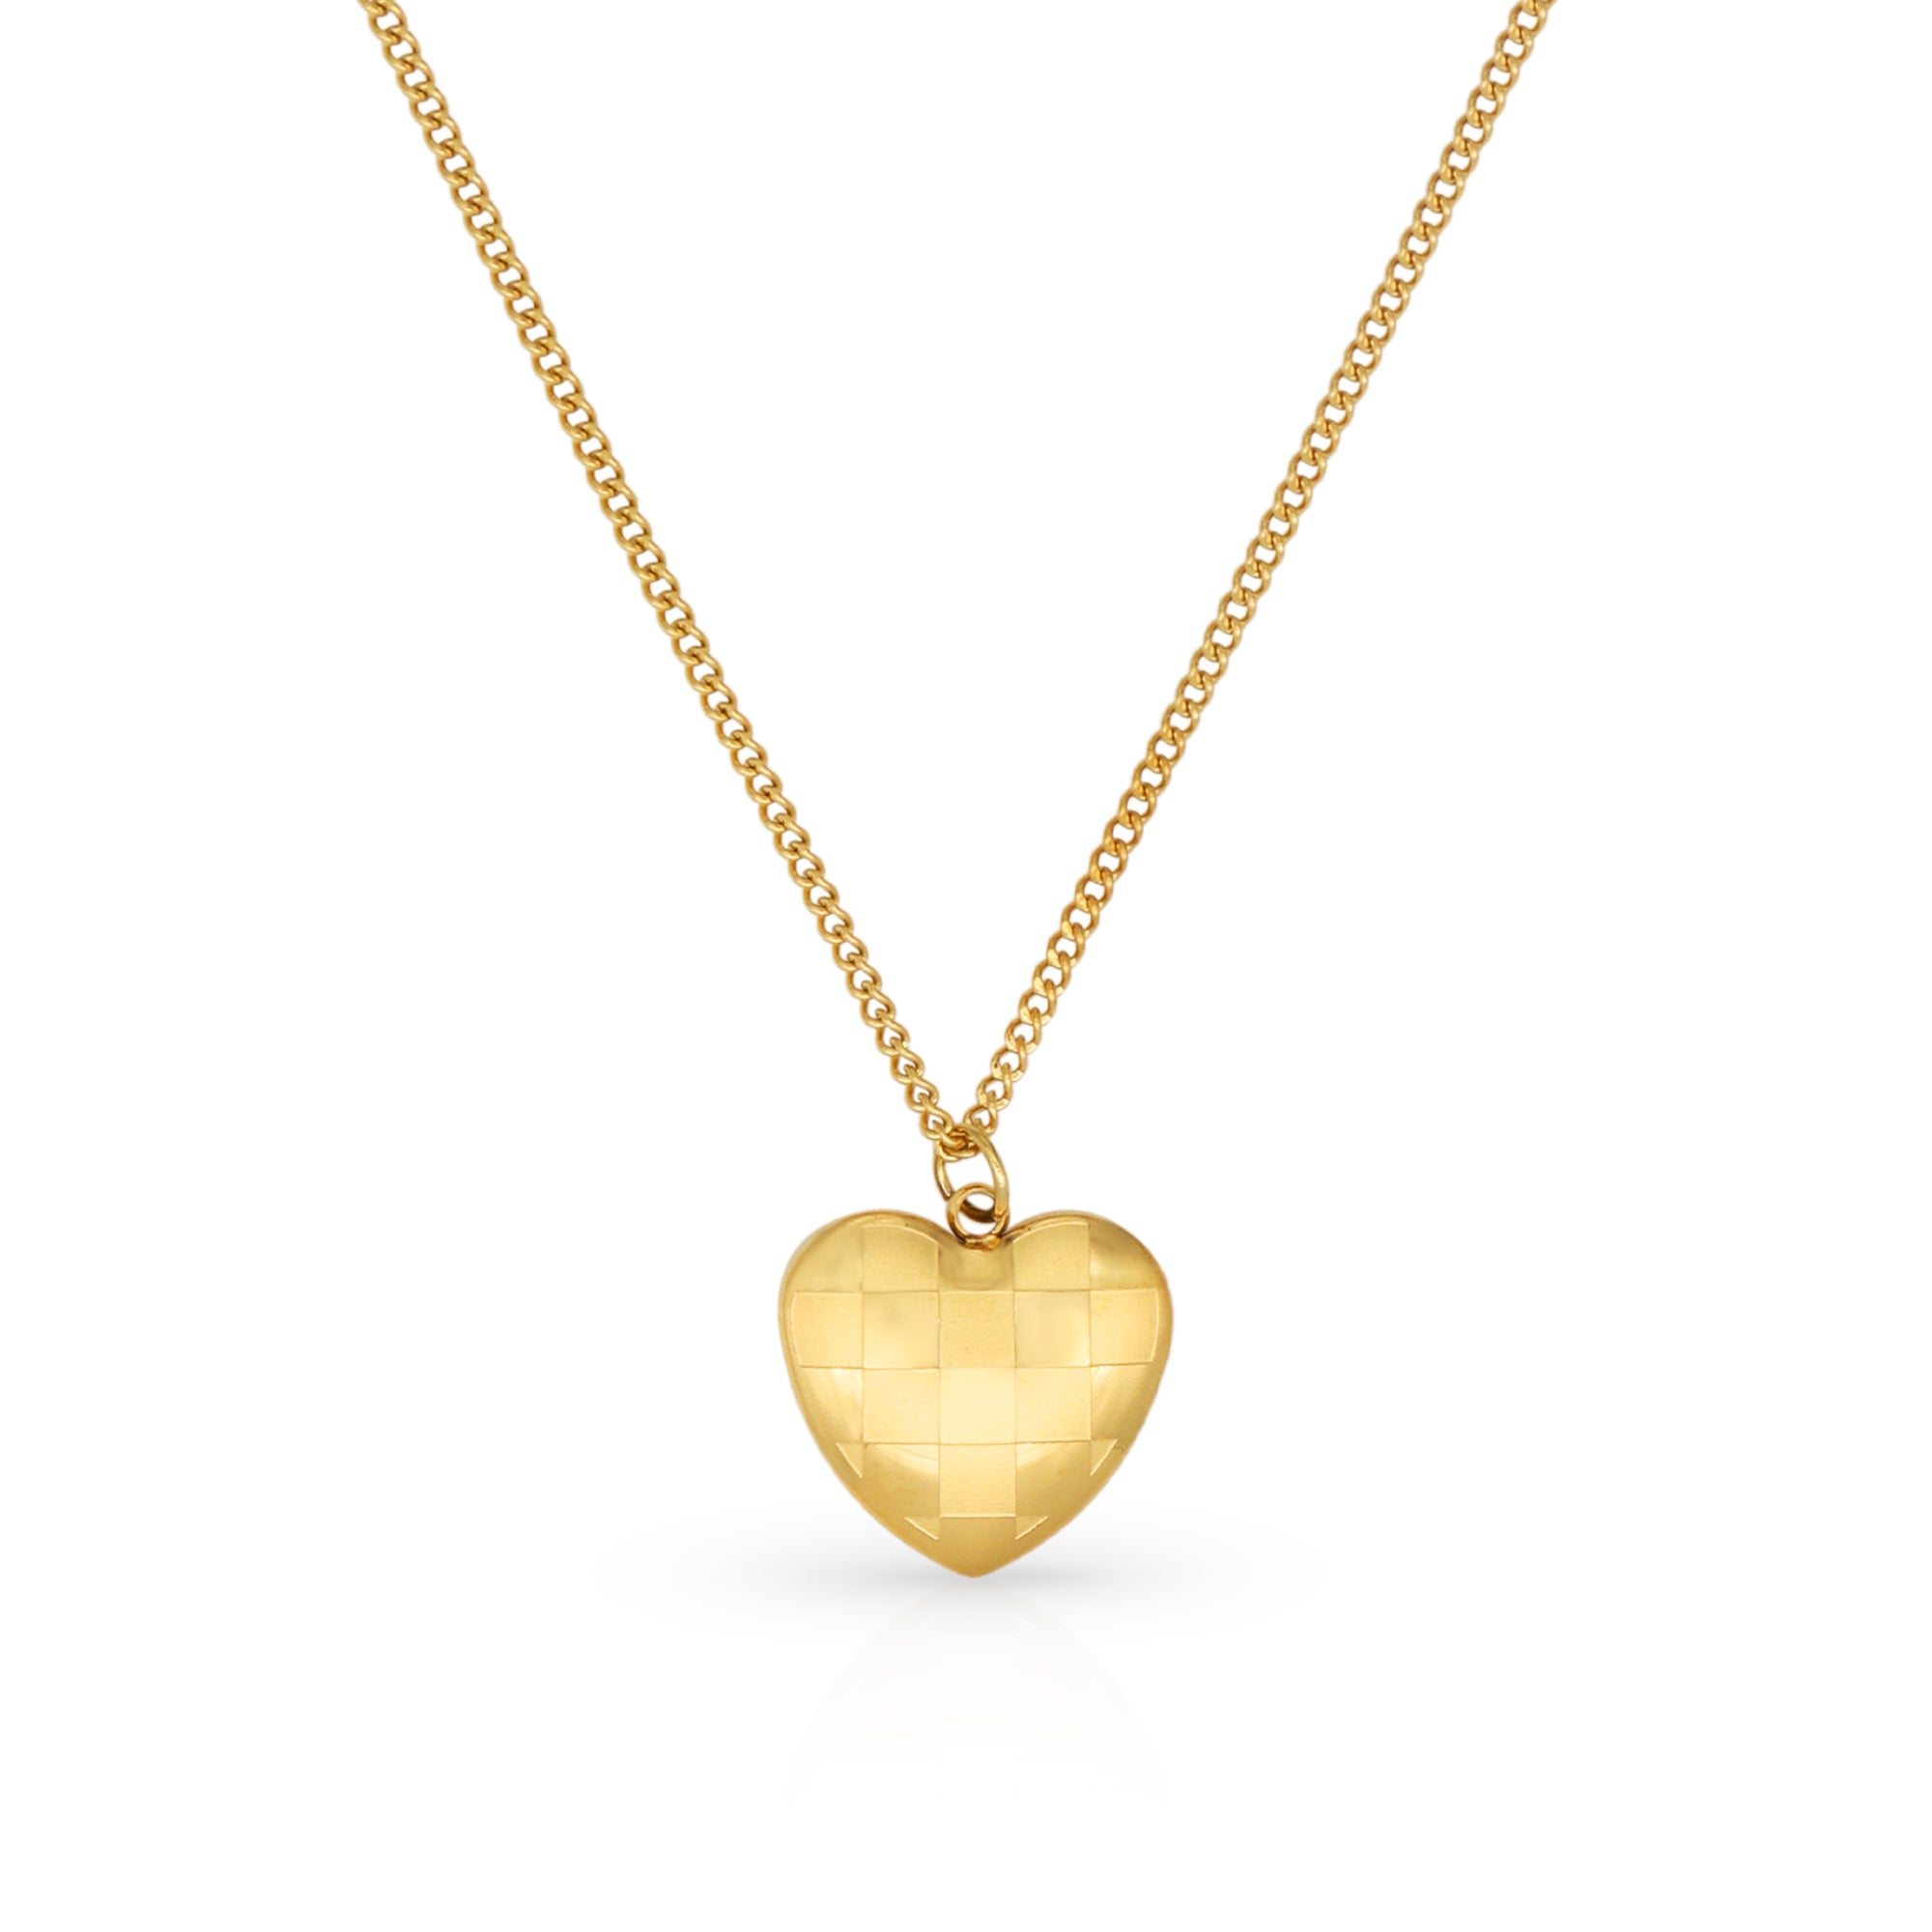 The Checkmate Heart Puff Gold Necklace